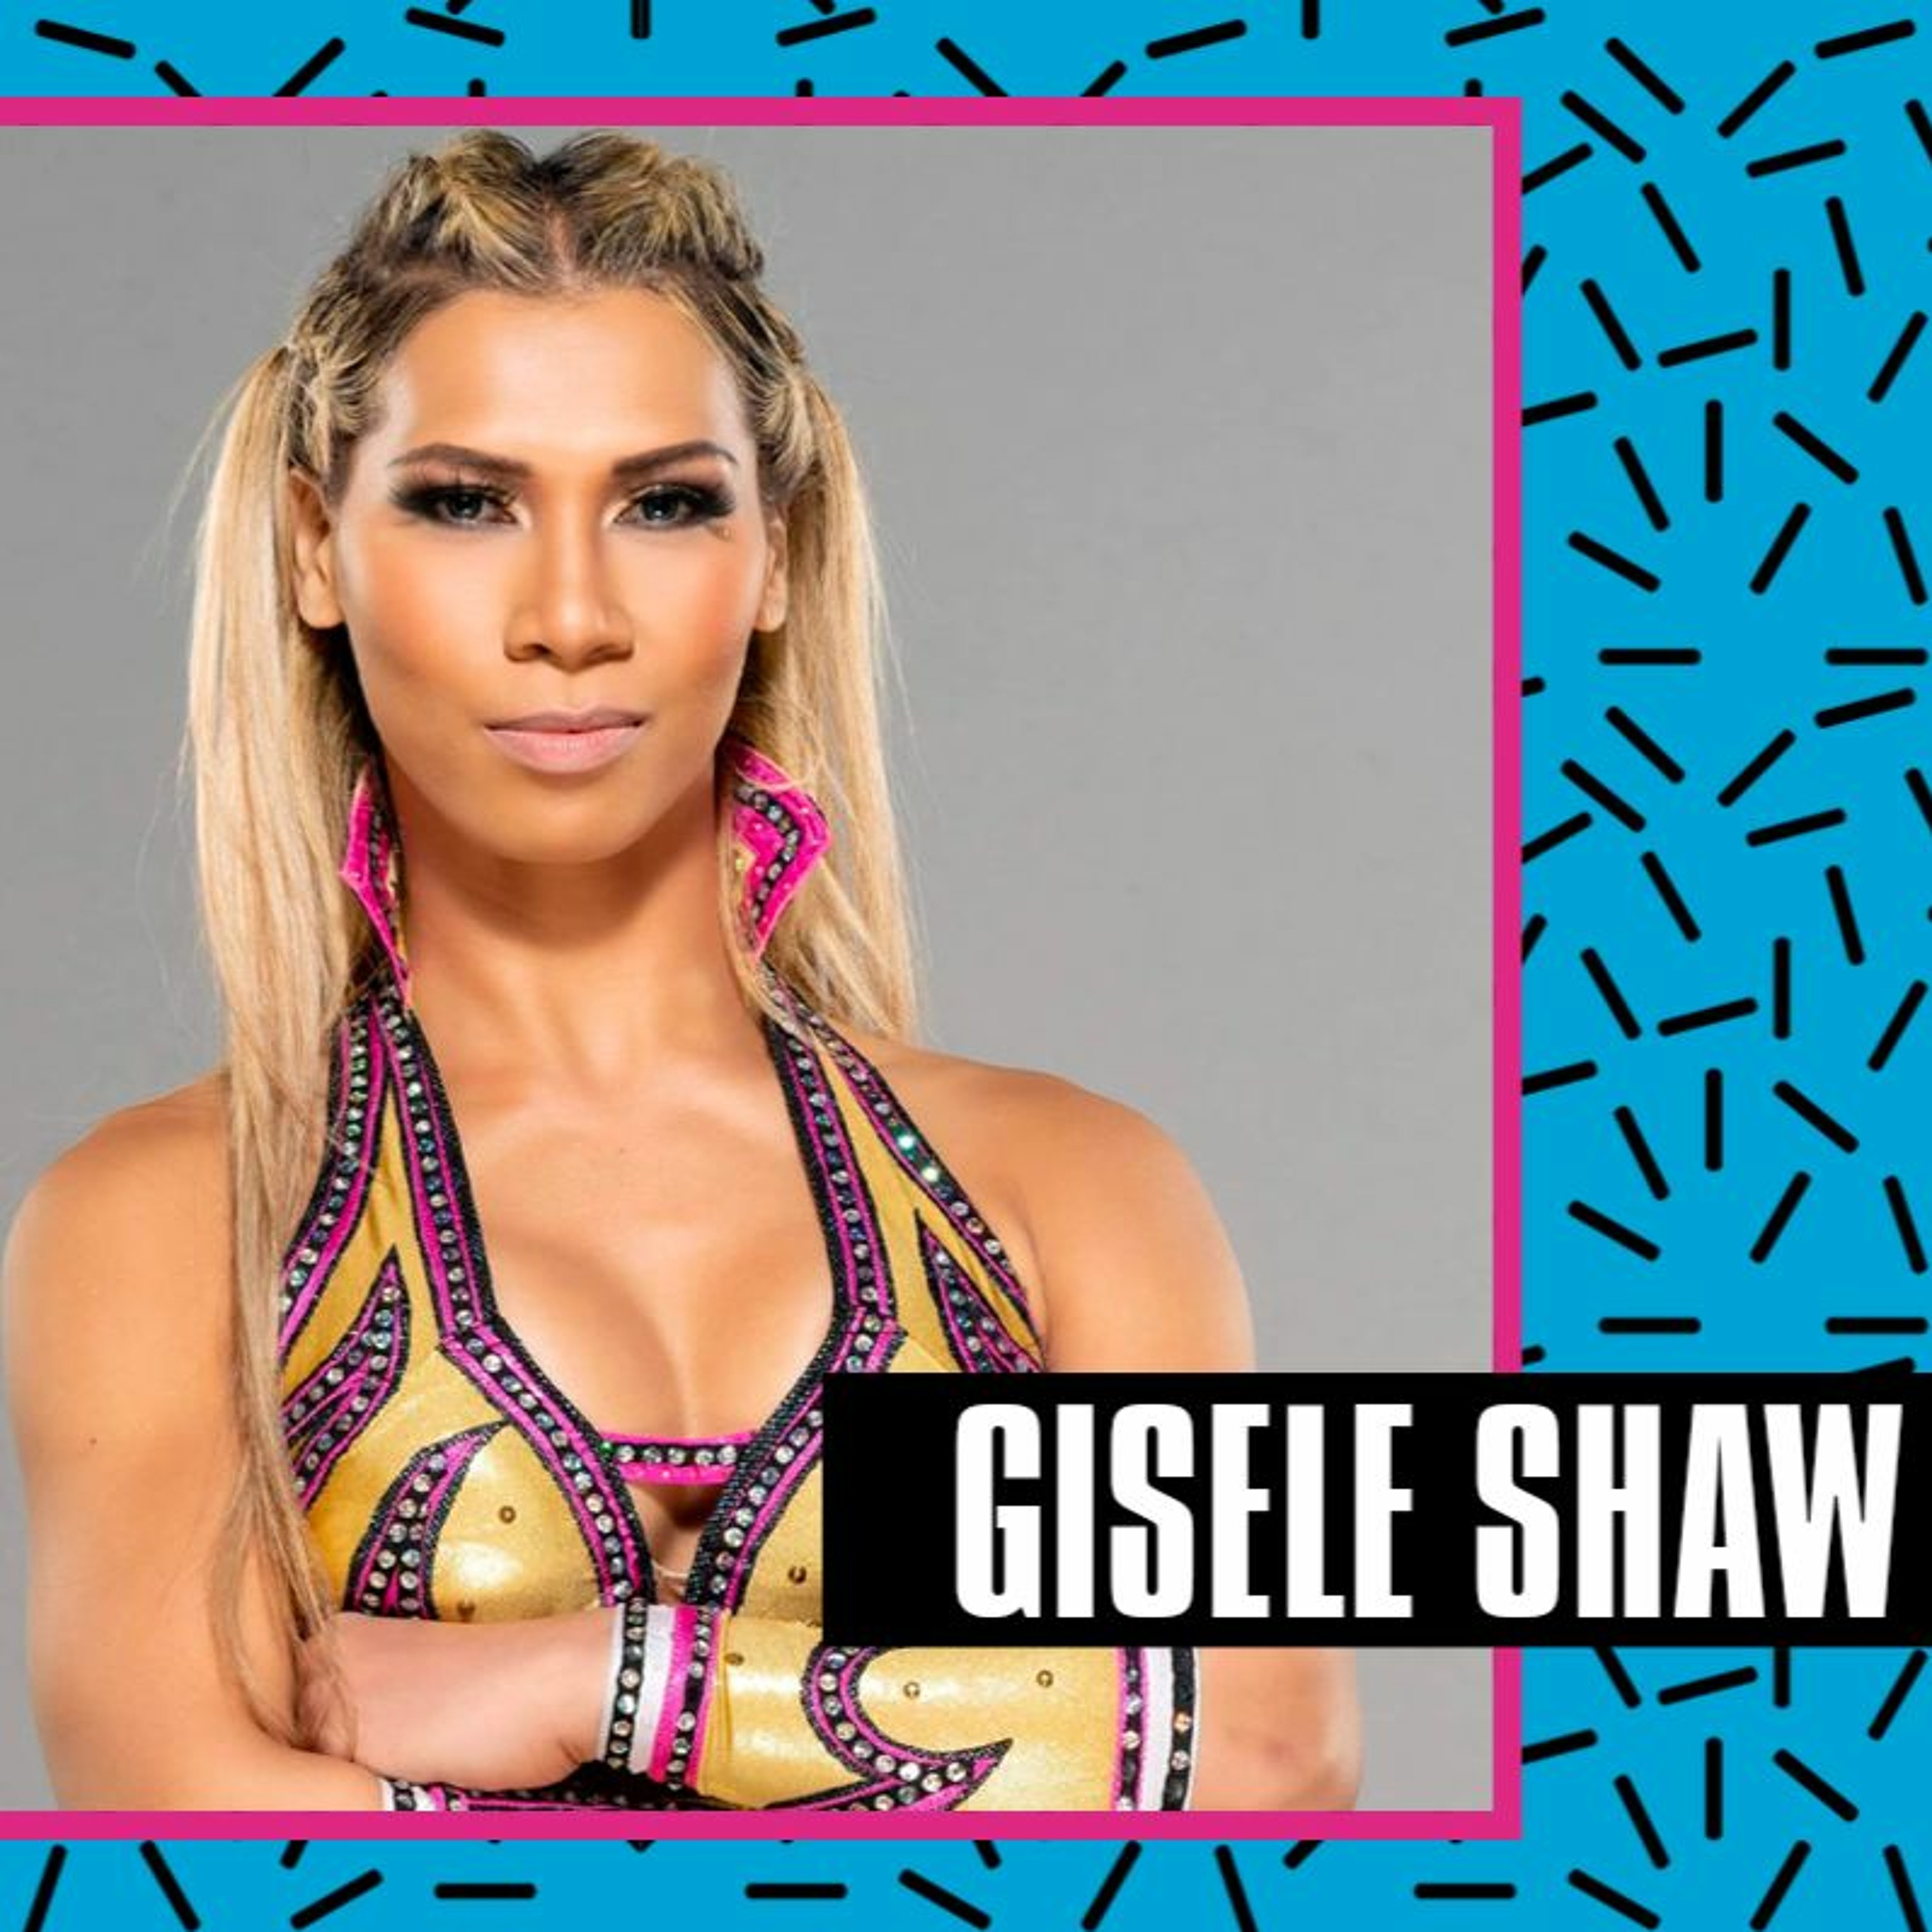 Gisele Shaw is reclaiming ‘Diva’, excited for TNA rebrand